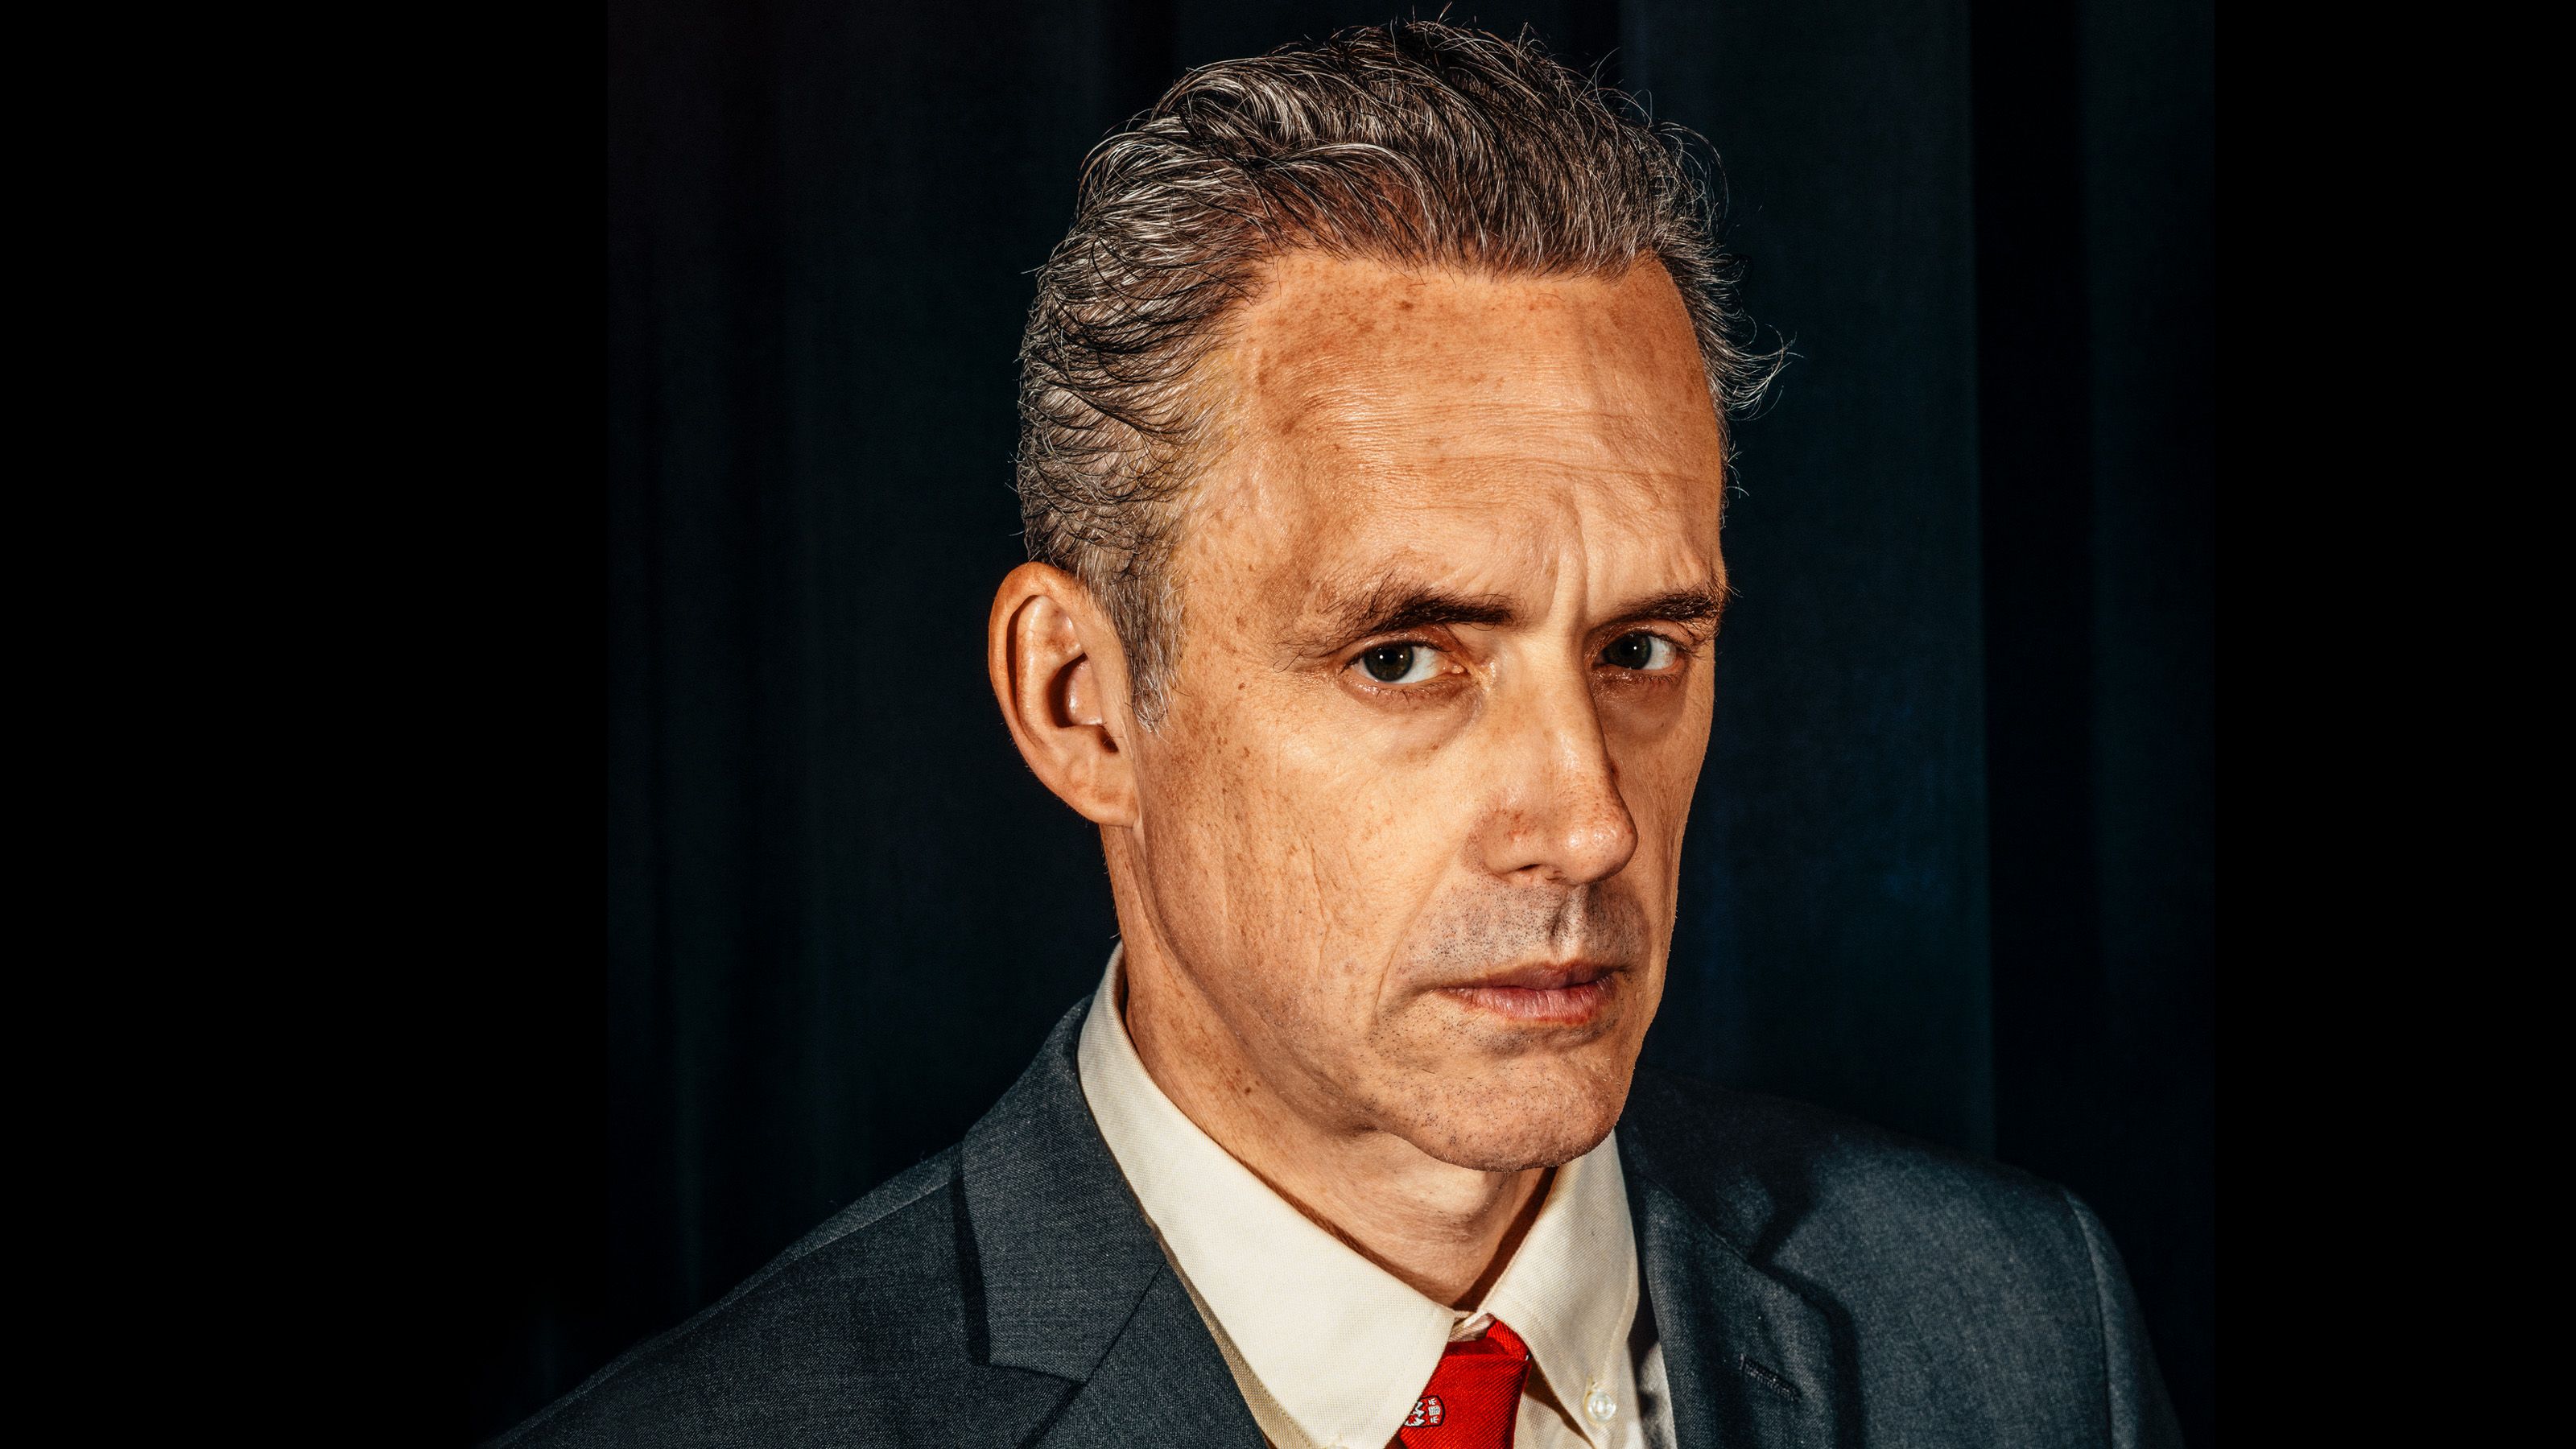 Getting worse Egypt Voltage Jordan Peterson Talks Political Correctness, the Radical Left, PC Culture  and 12 Rules for Life